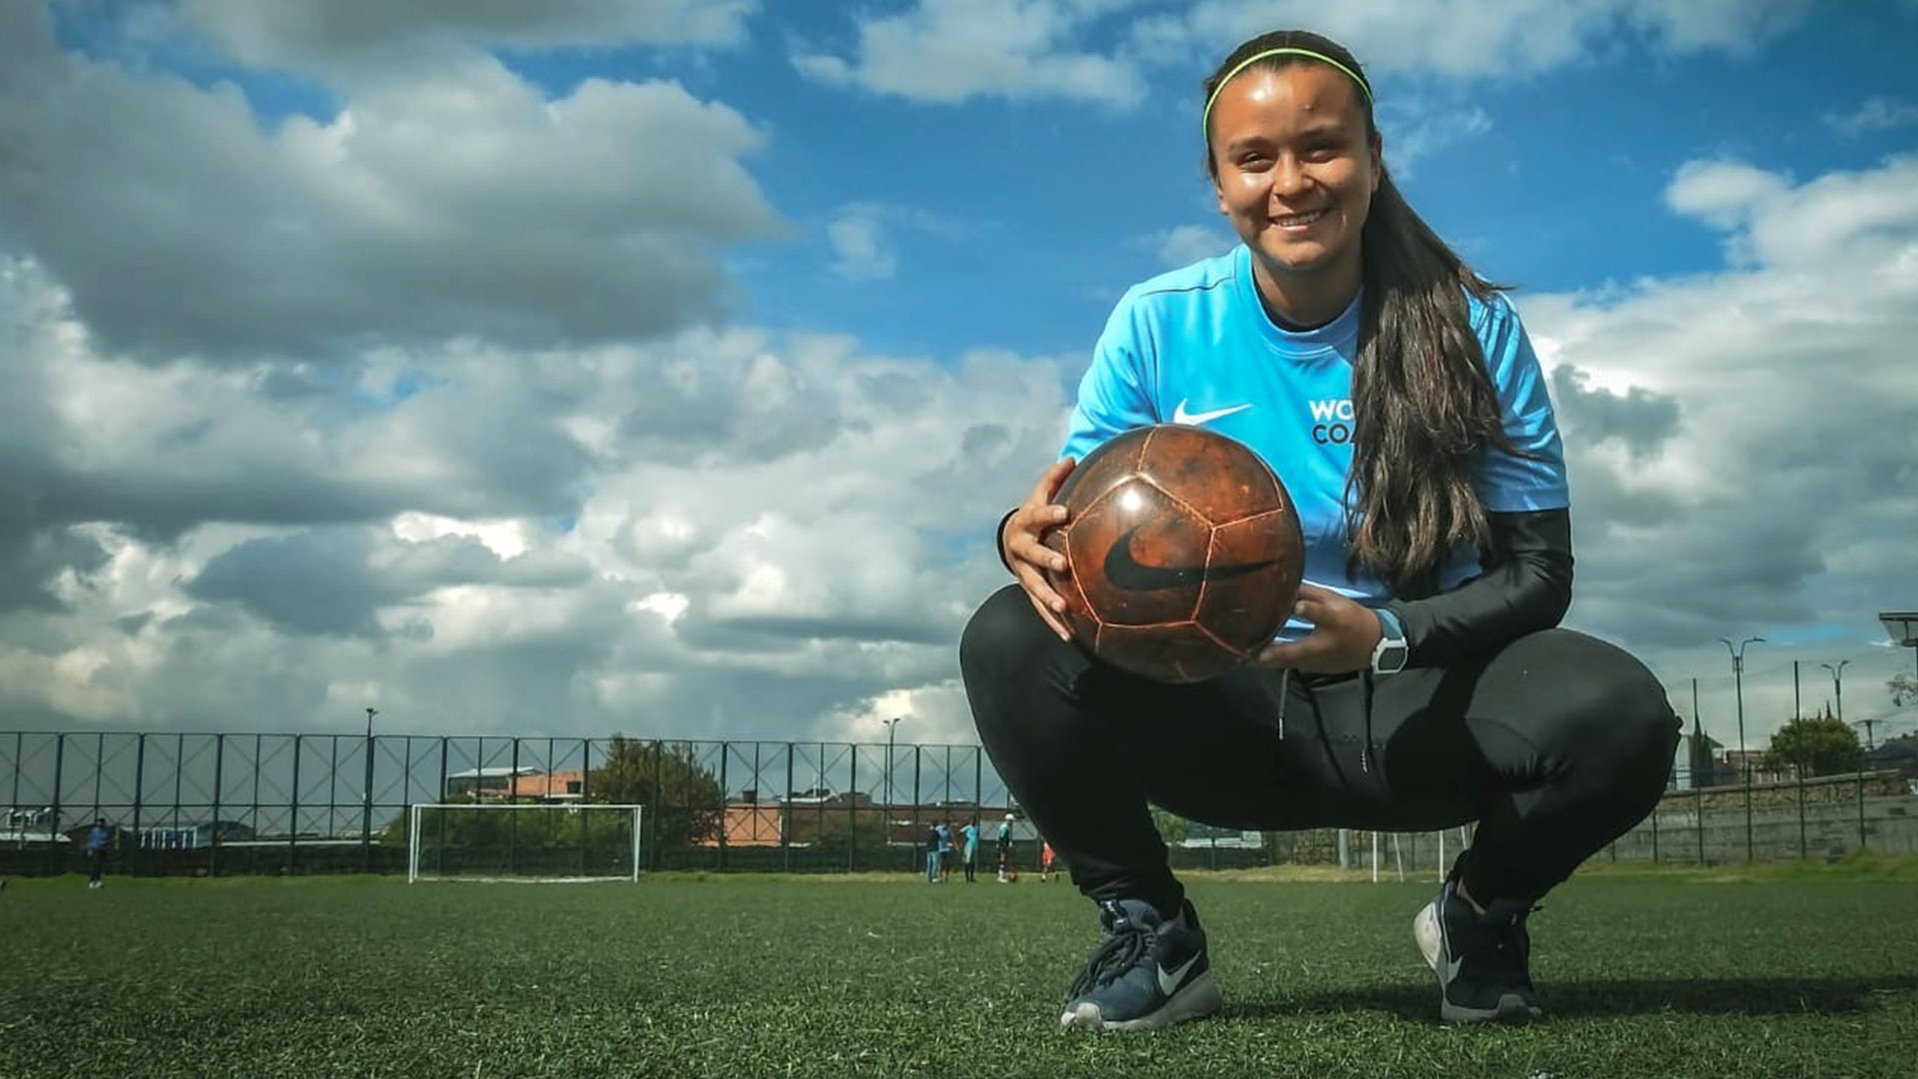 Karen uit Colombia, Bogotà doet mee aan ons voetbalproject 'Play it for live and future'